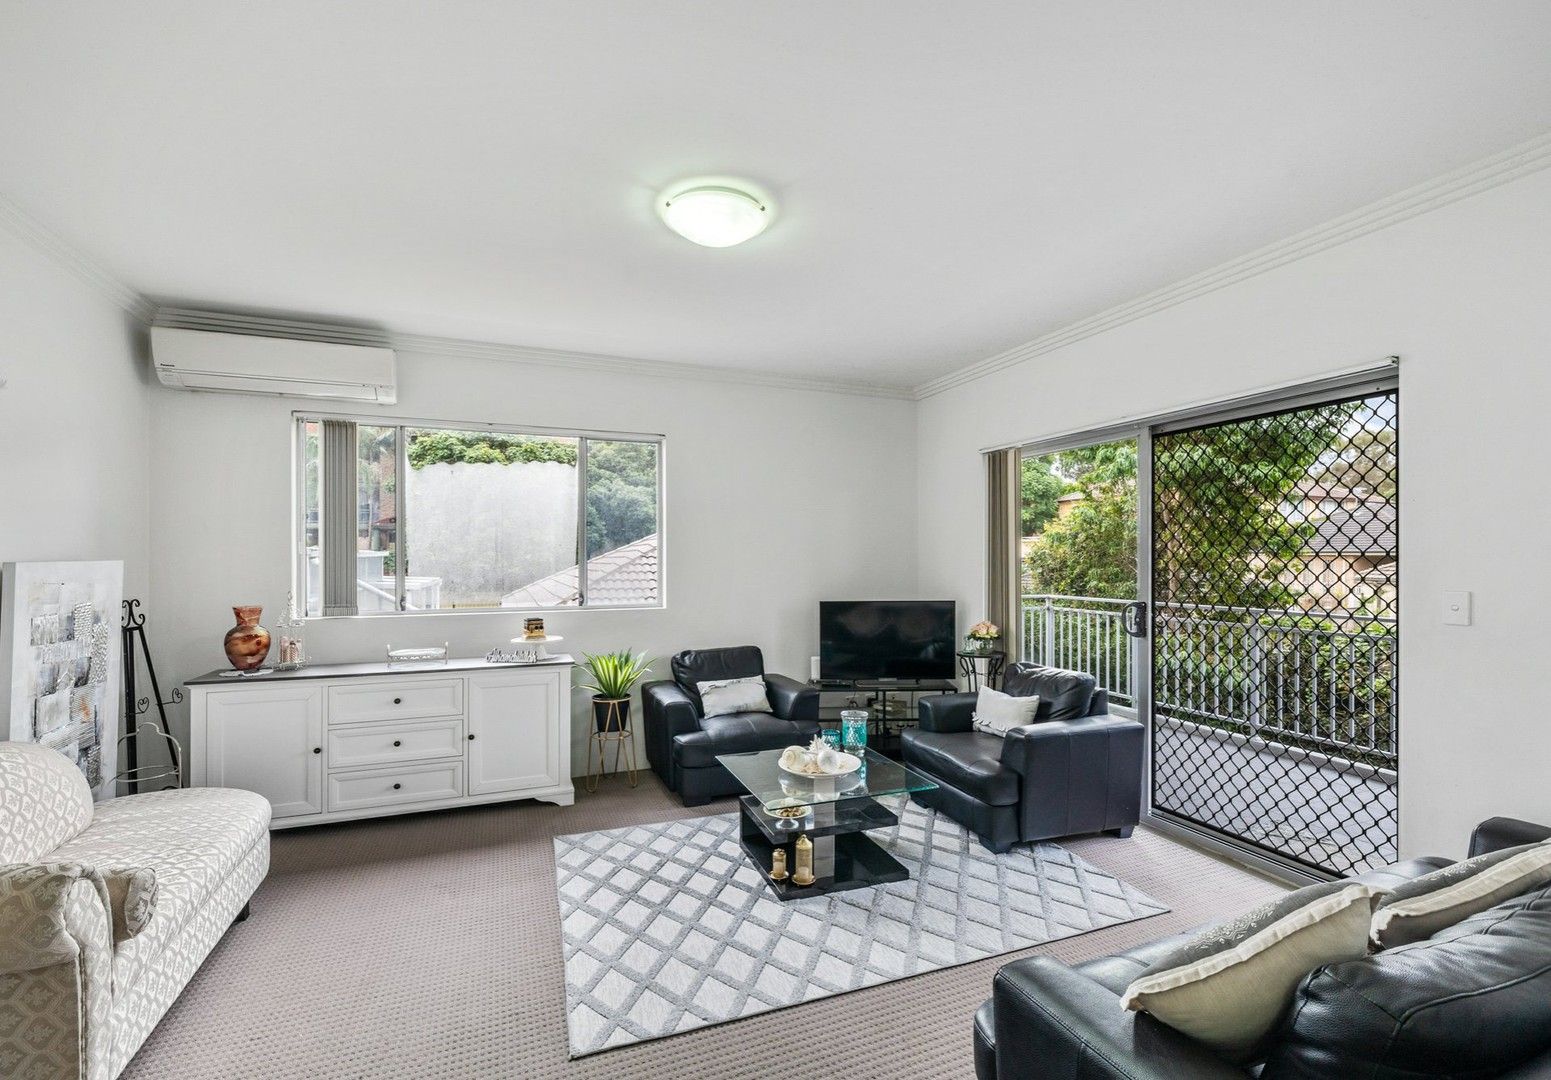 14/61-65 Cairds Avenue, Bankstown NSW 2200, Image 0